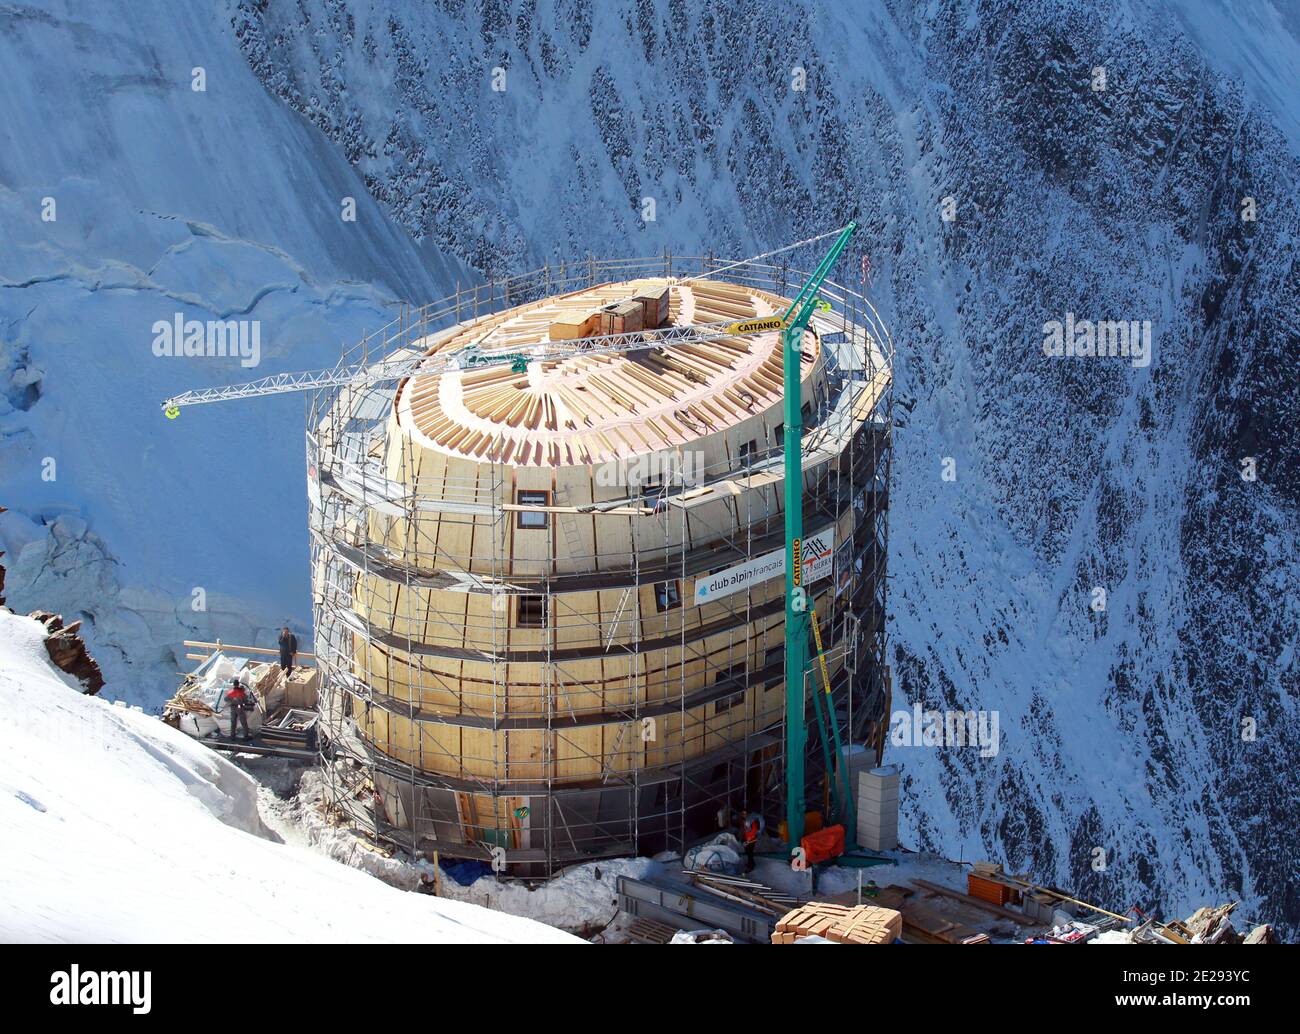 A view of the new 'Refuge du Gouter' in the French Alps, near St. Gervais,  France on September 28, 2011. The new mountain refuge is located at an  altitude of 3,815 meters (